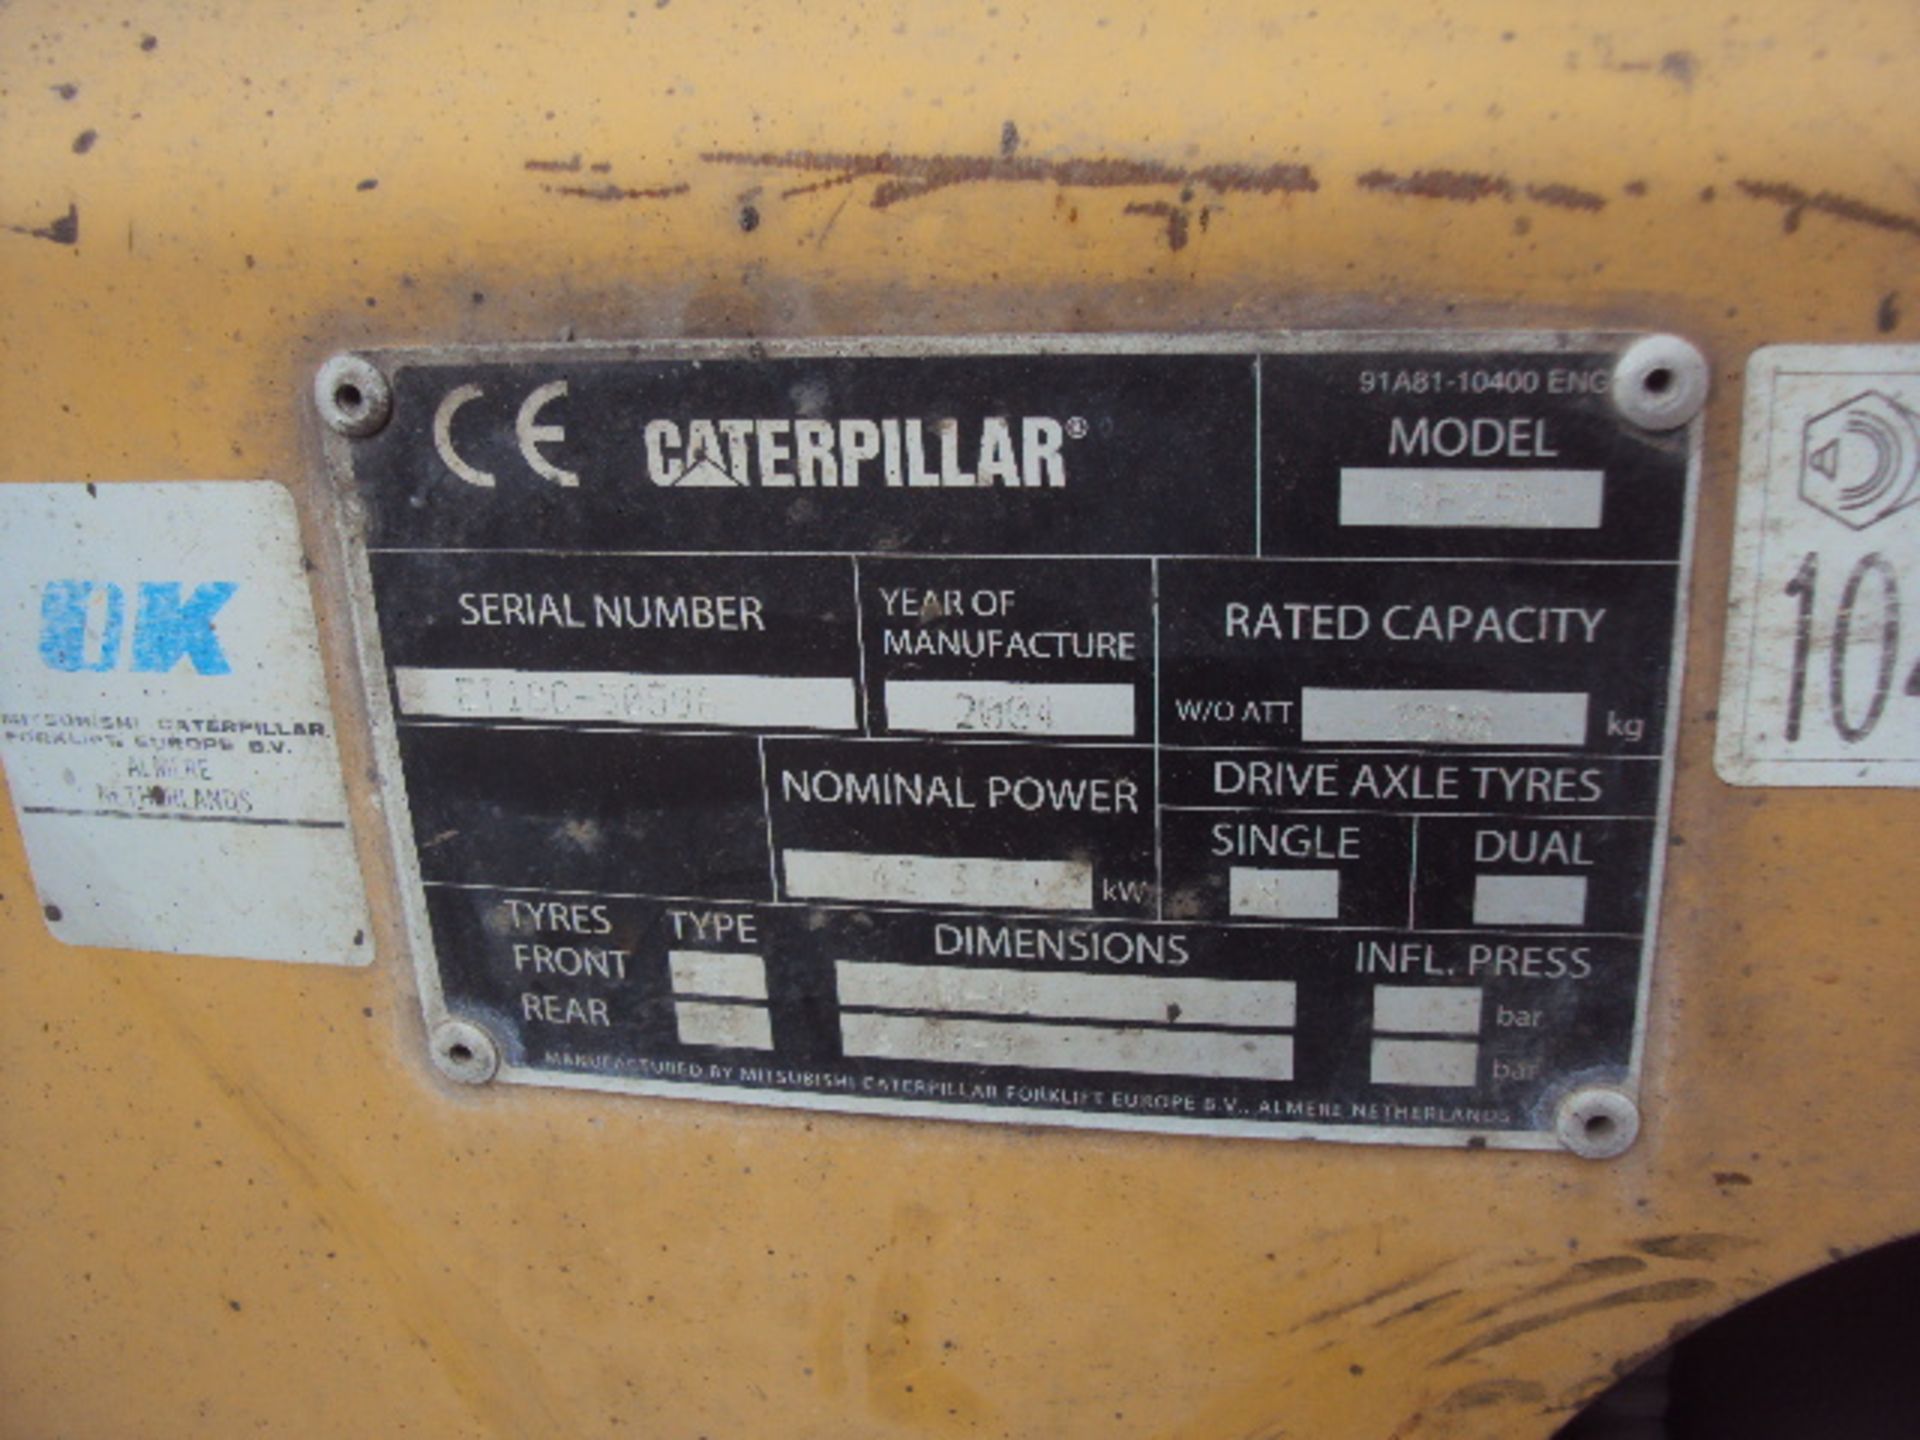 2004 CATERPILLAR DP25N 2.5t diesel driven forklift truck S/n: ET18C-50506 (3568 recorded hours) with - Image 5 of 9